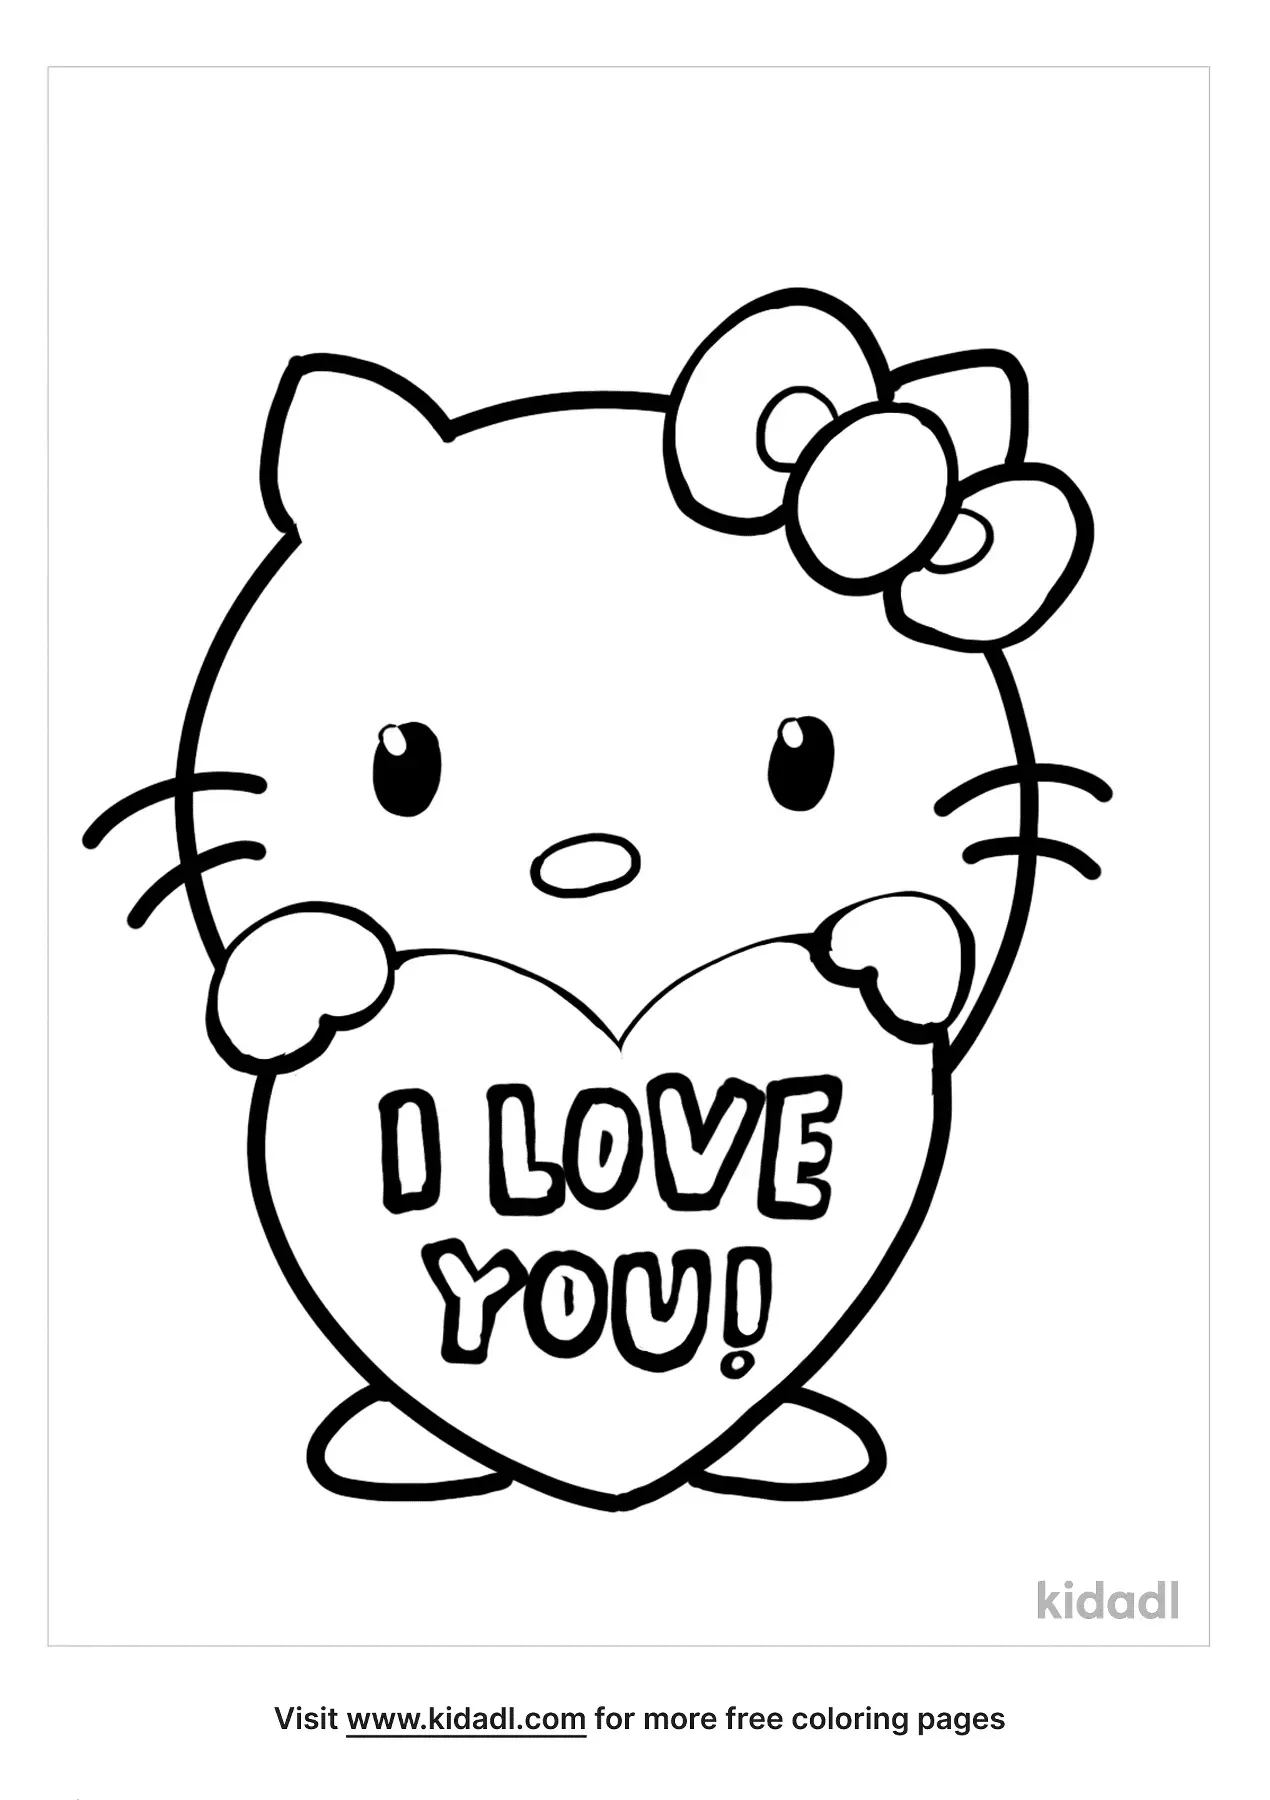 Free I Love You Coloring Page | Coloring Page Printables | Kidadl